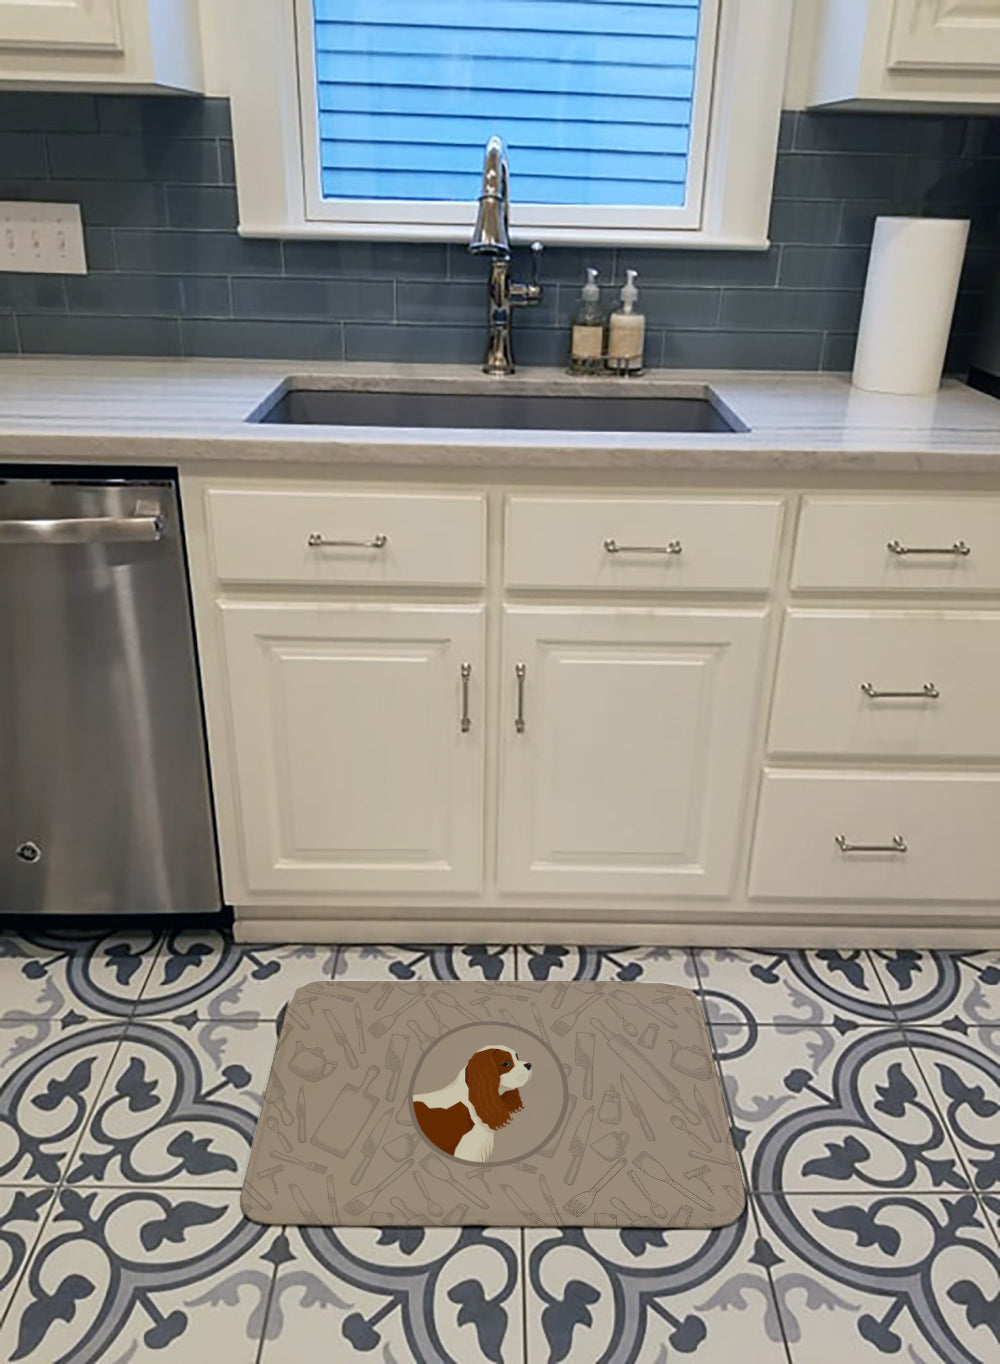 Cavalier Spaniel In the Kitchen Machine Washable Memory Foam Mat CK2176RUG - the-store.com